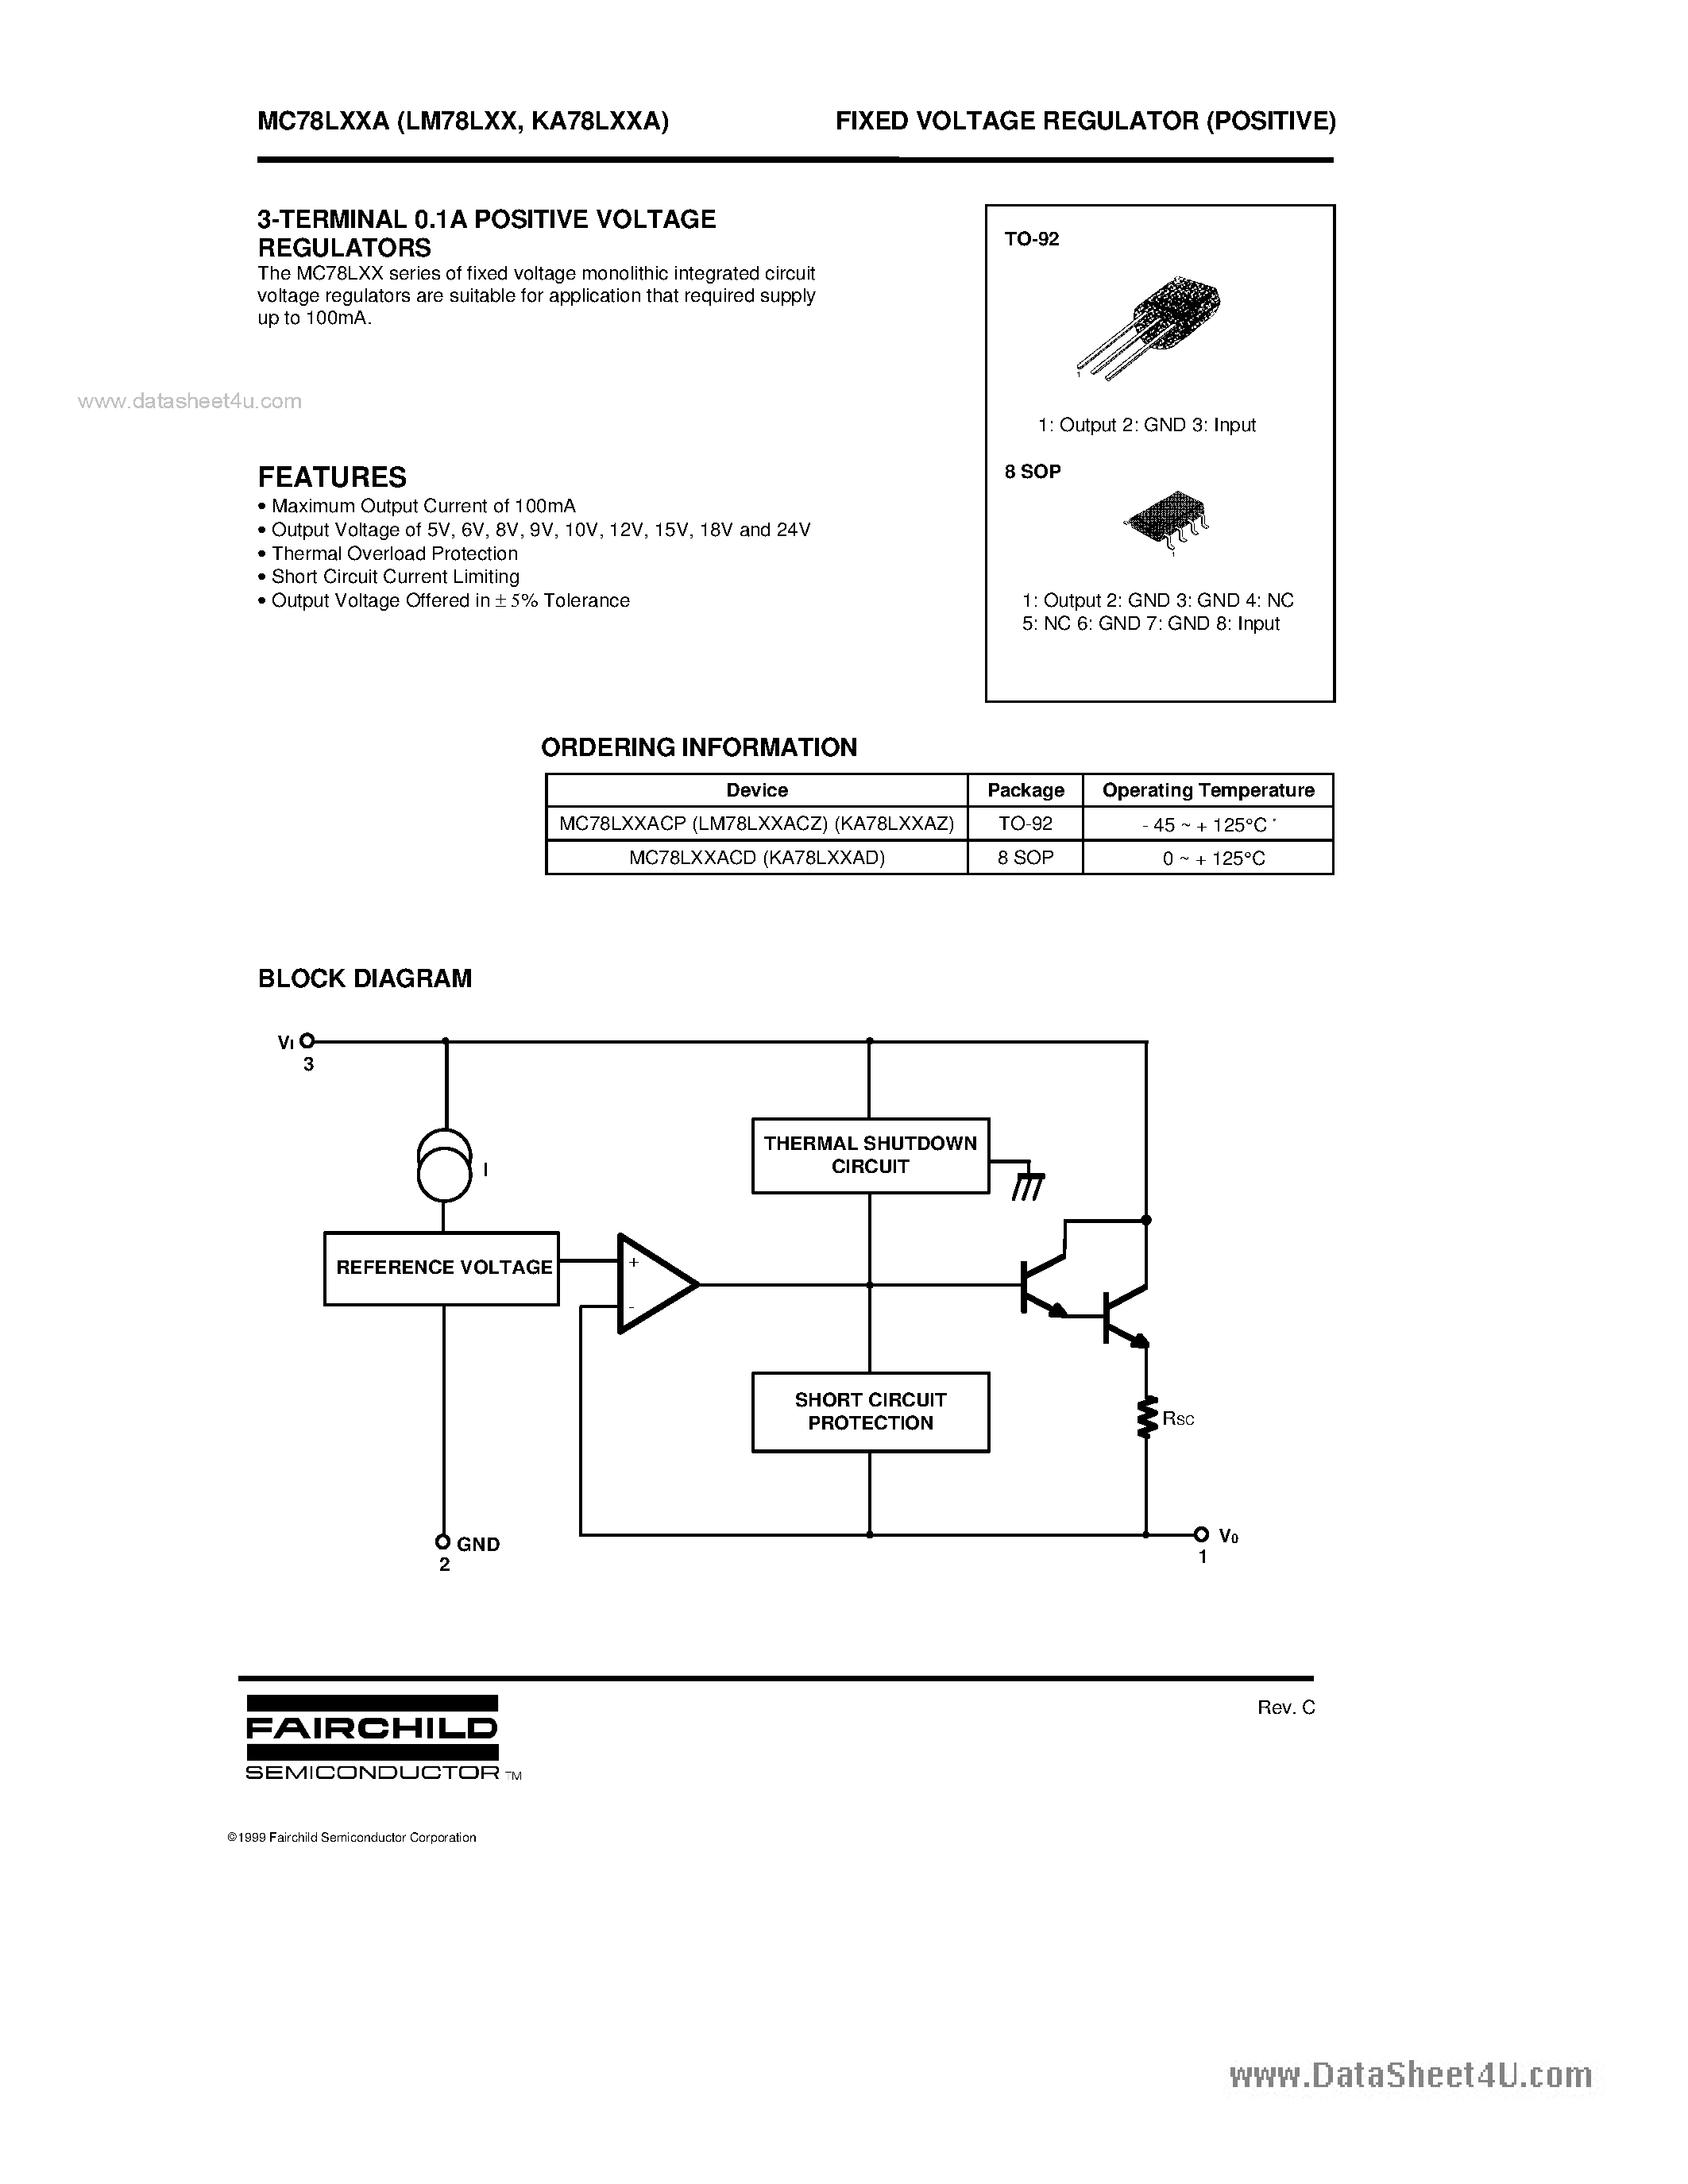 Datasheet LM78L05 - (LM78LxxA) FIXED VOLTAGE REGULATOR page 1